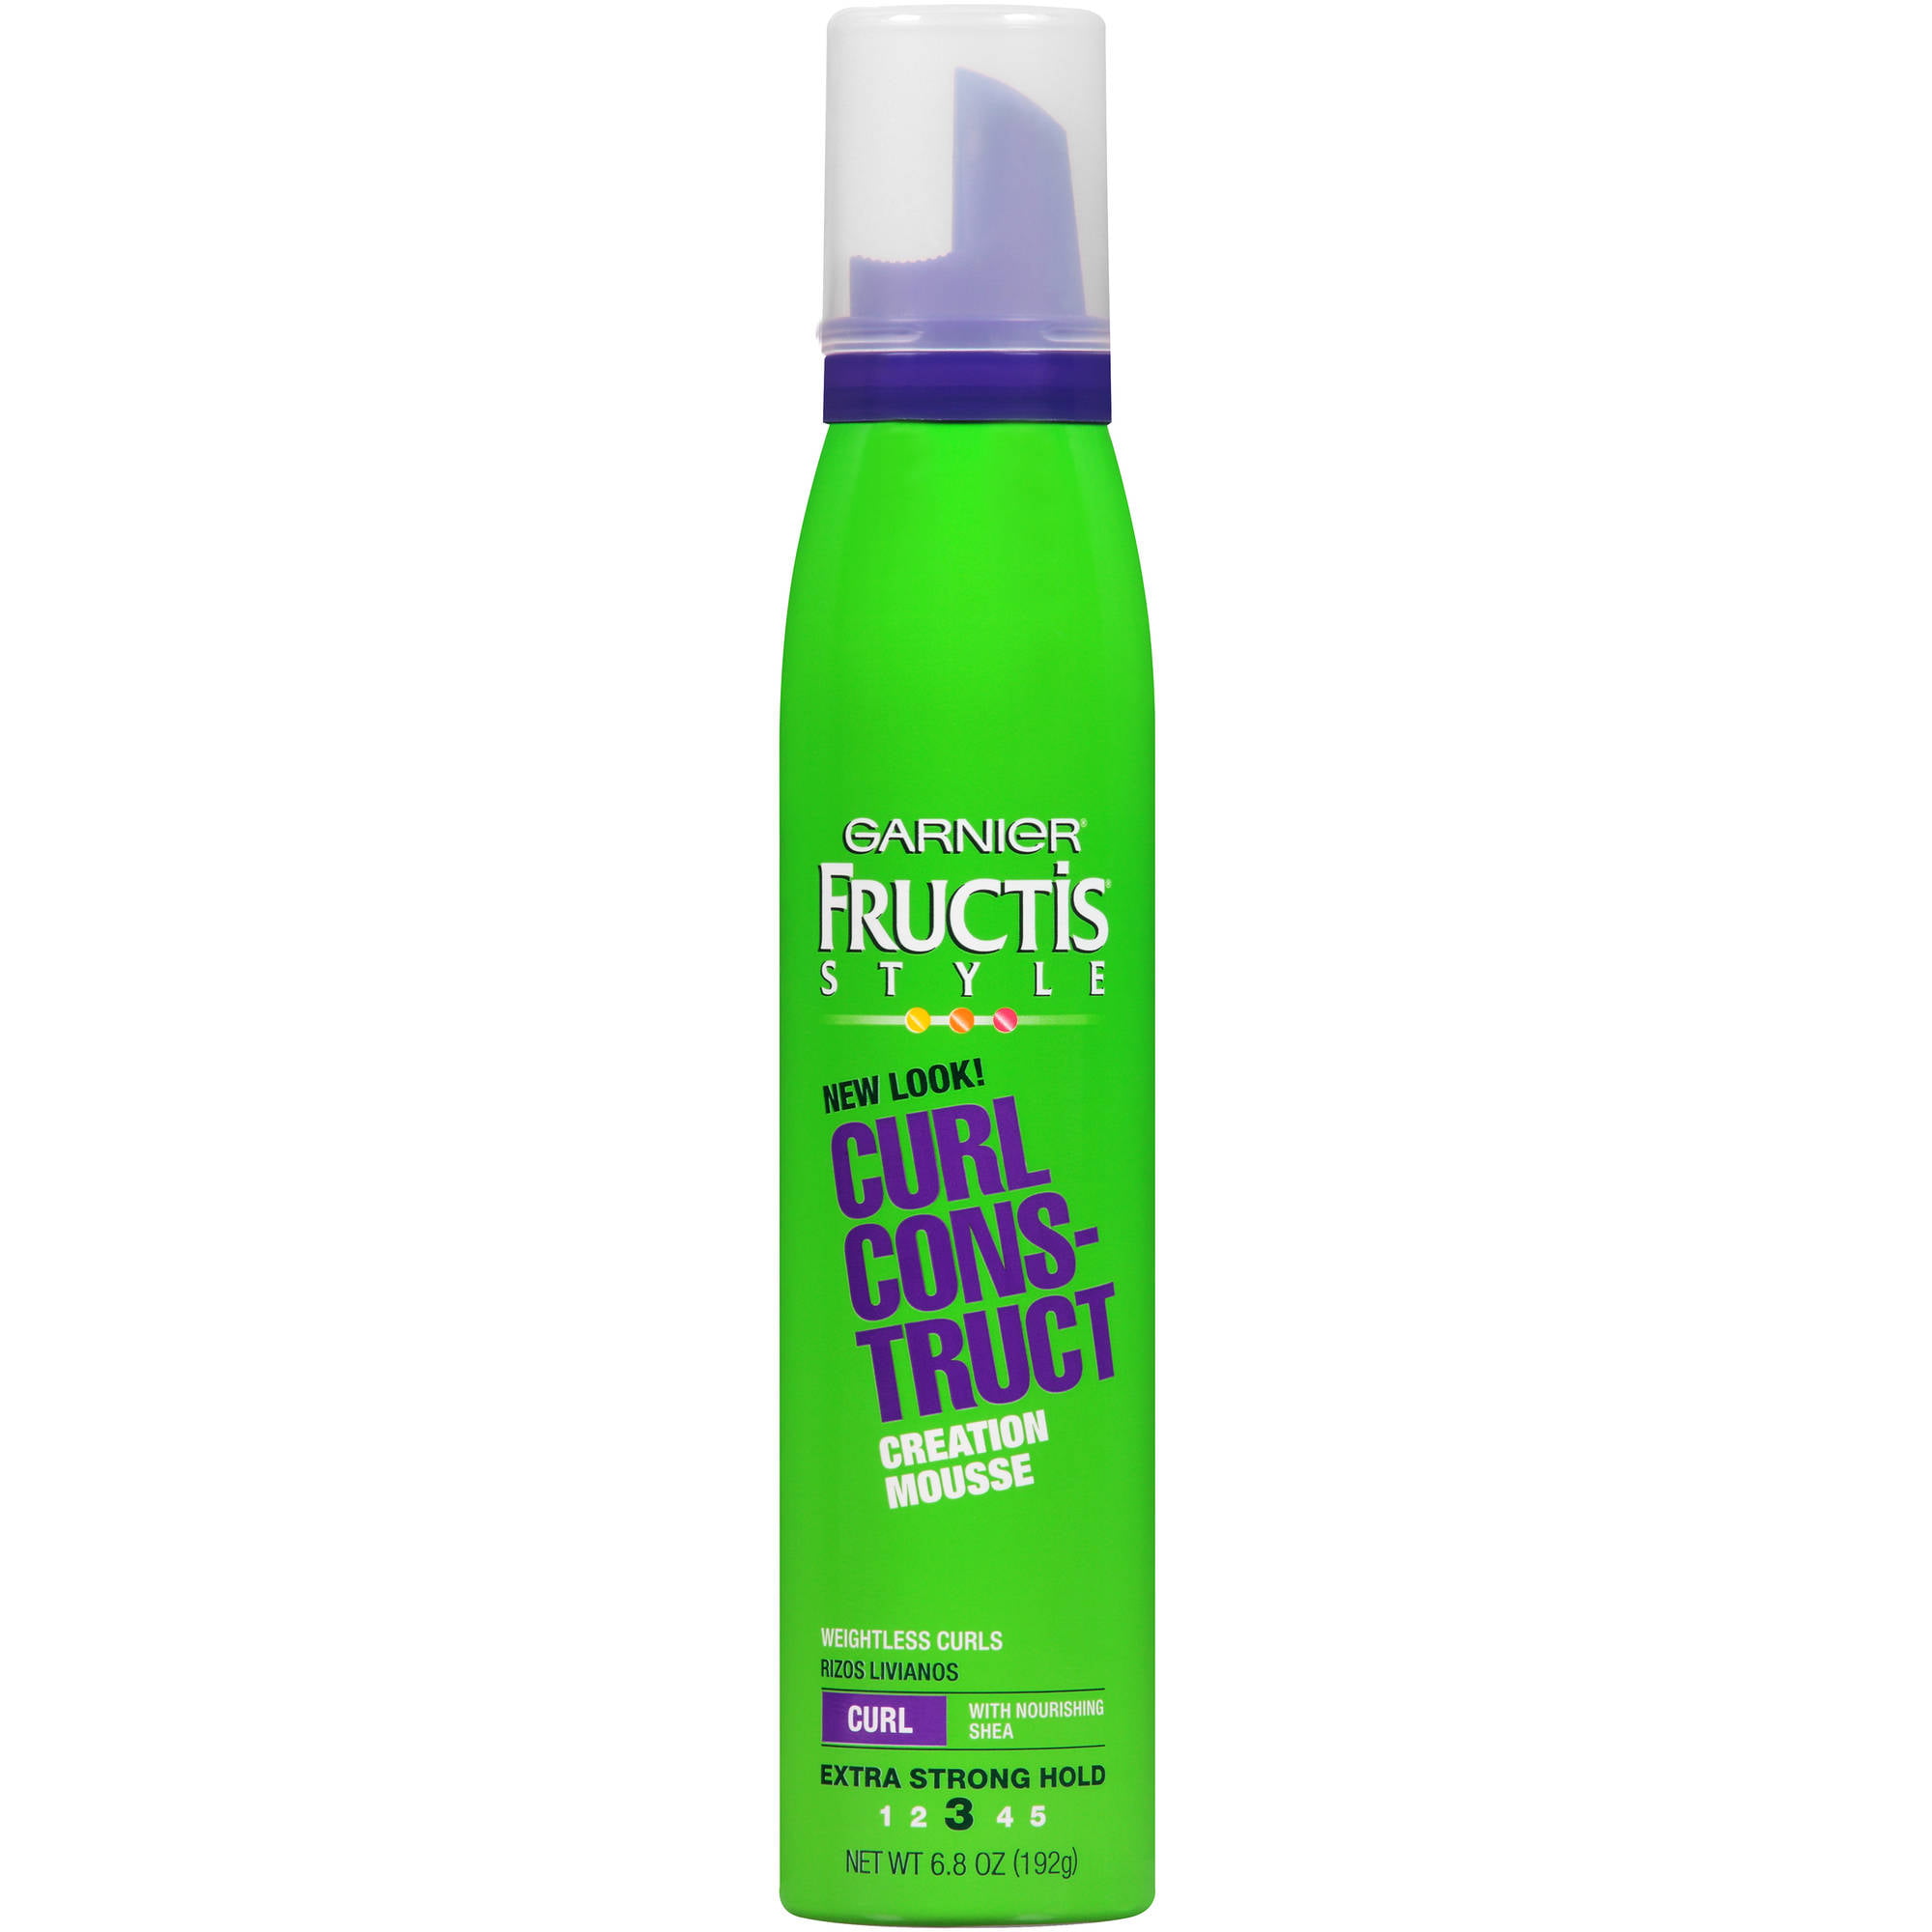 Garnier Fructis Style Extra Strong Curl Construct Mousse, 6.8 oz